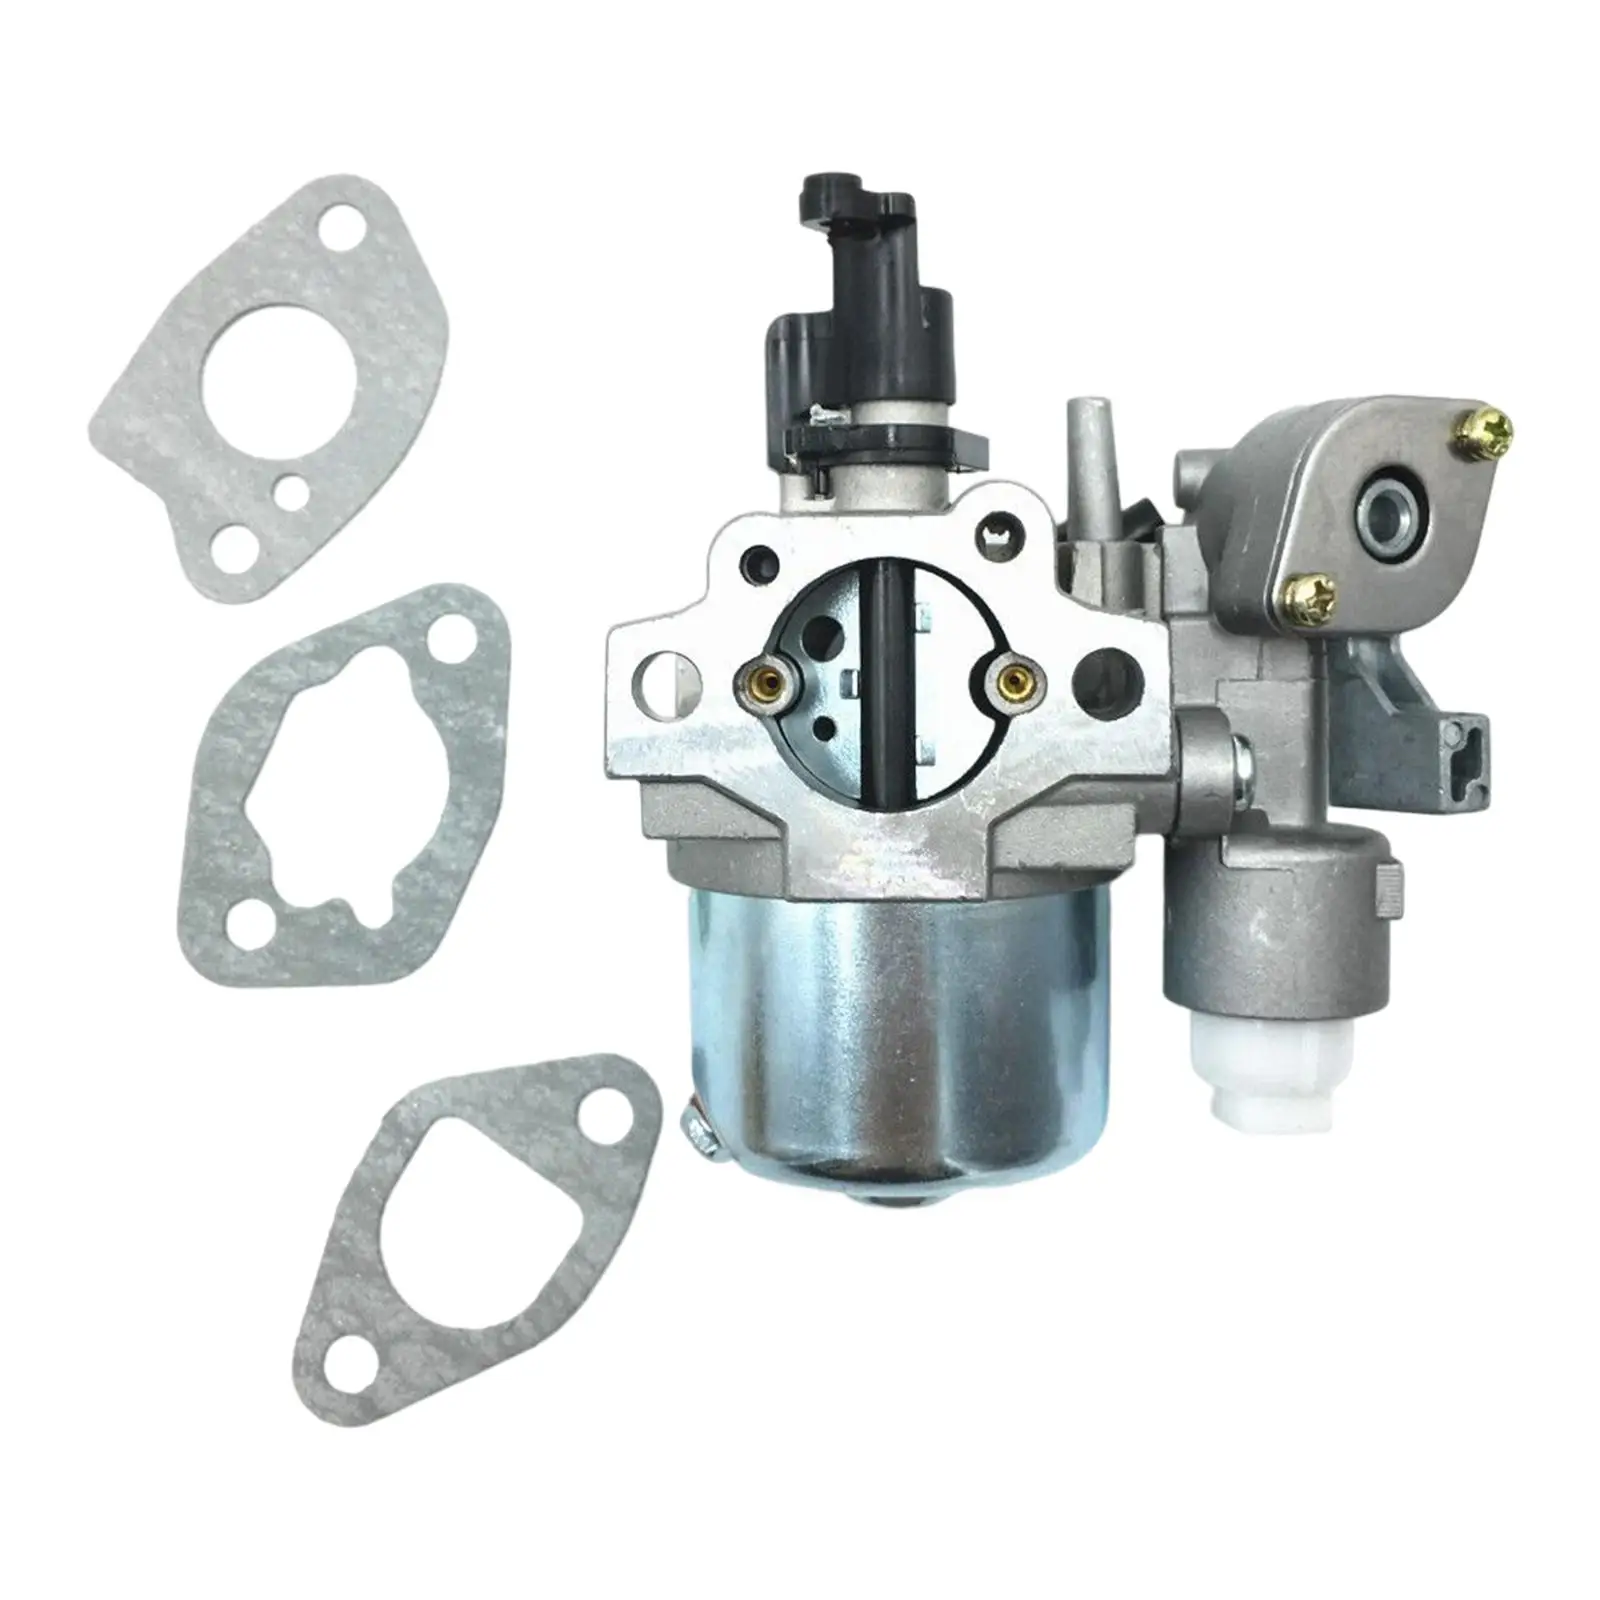 Carburetor Accessory Replaces Parts Durable Practical Portable Easy to Install